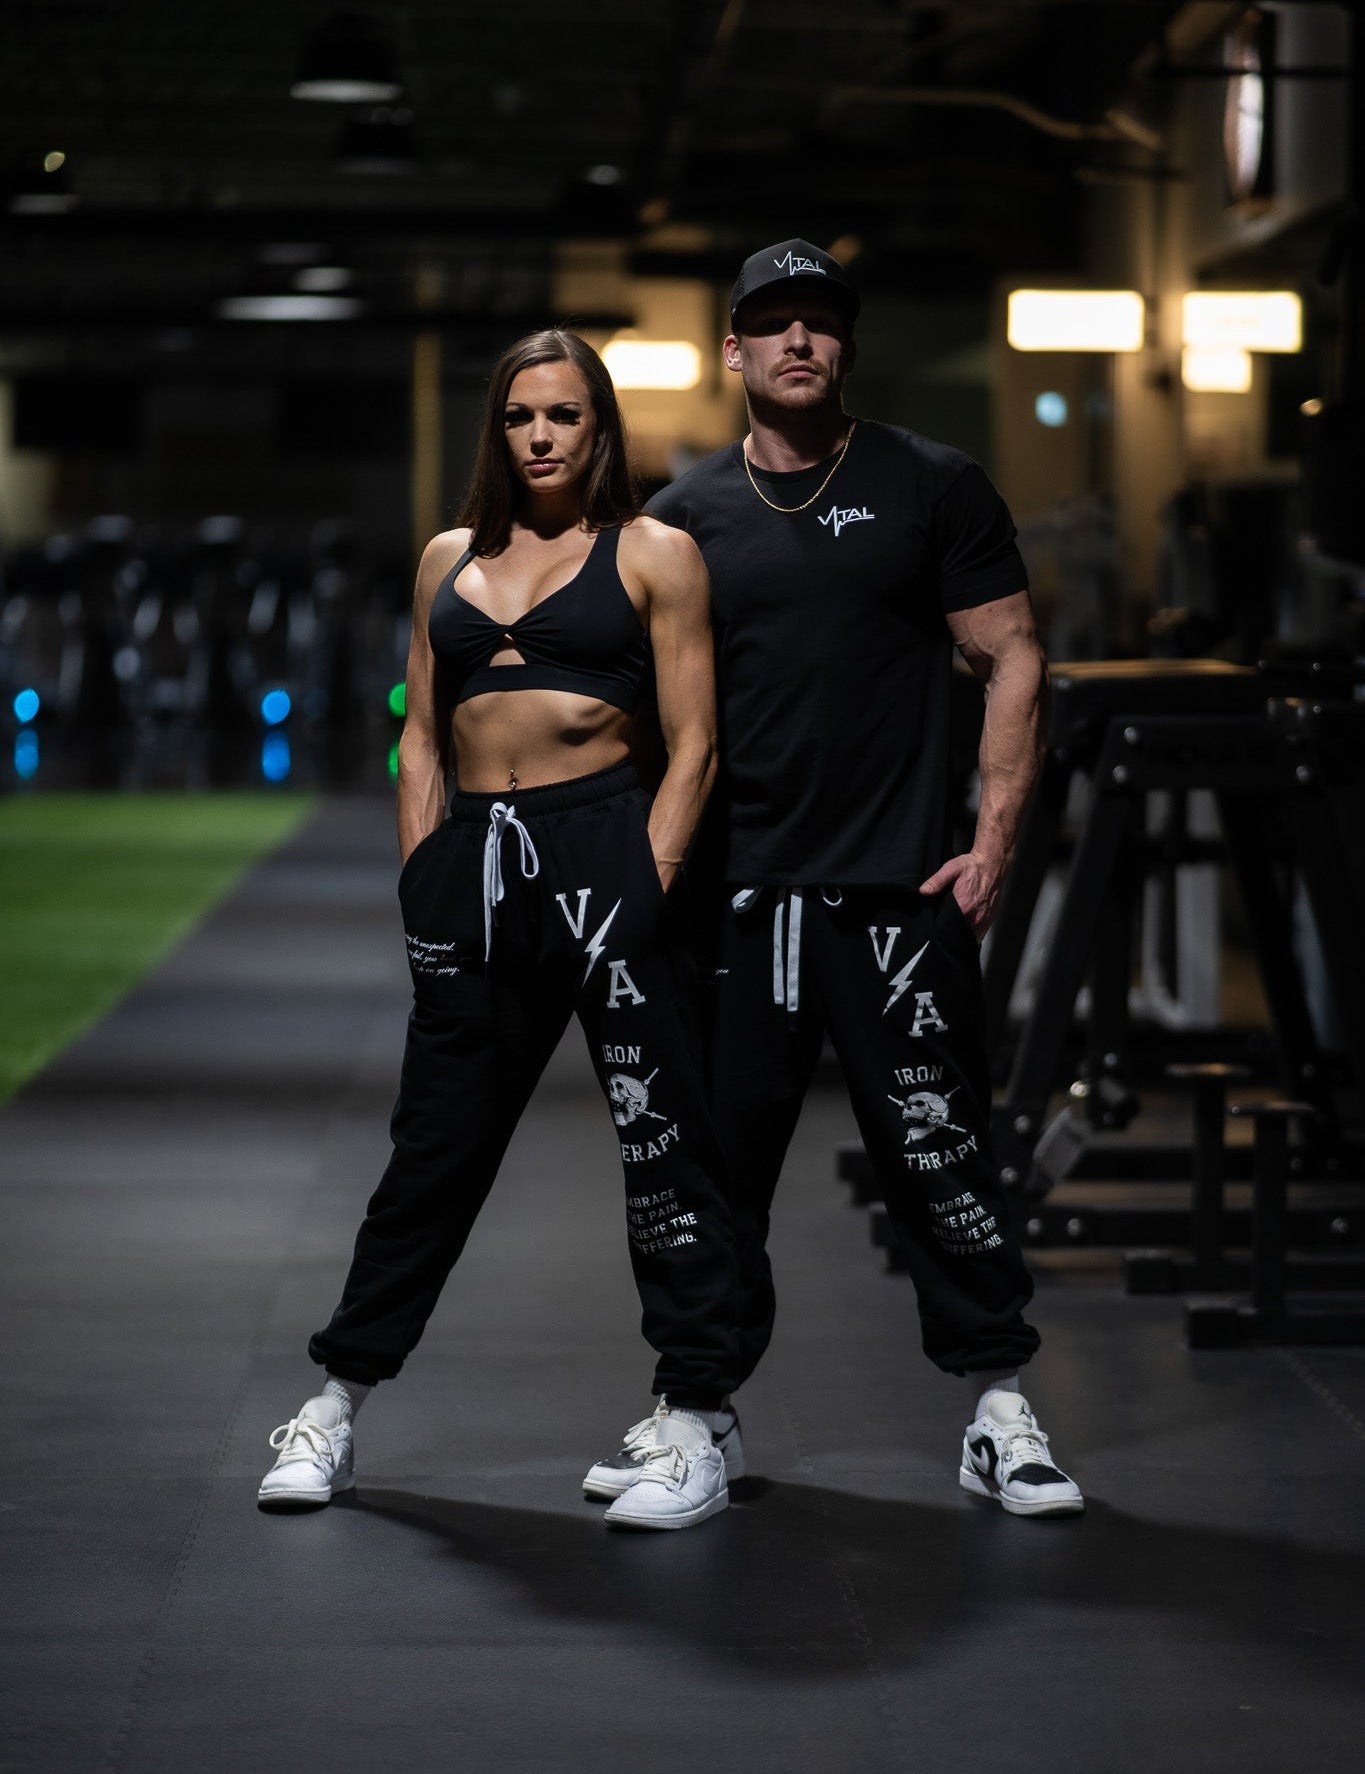 Relentless Iron Therapy Heavy Weight Sweatpants - Unisex - VITAL APPAREL